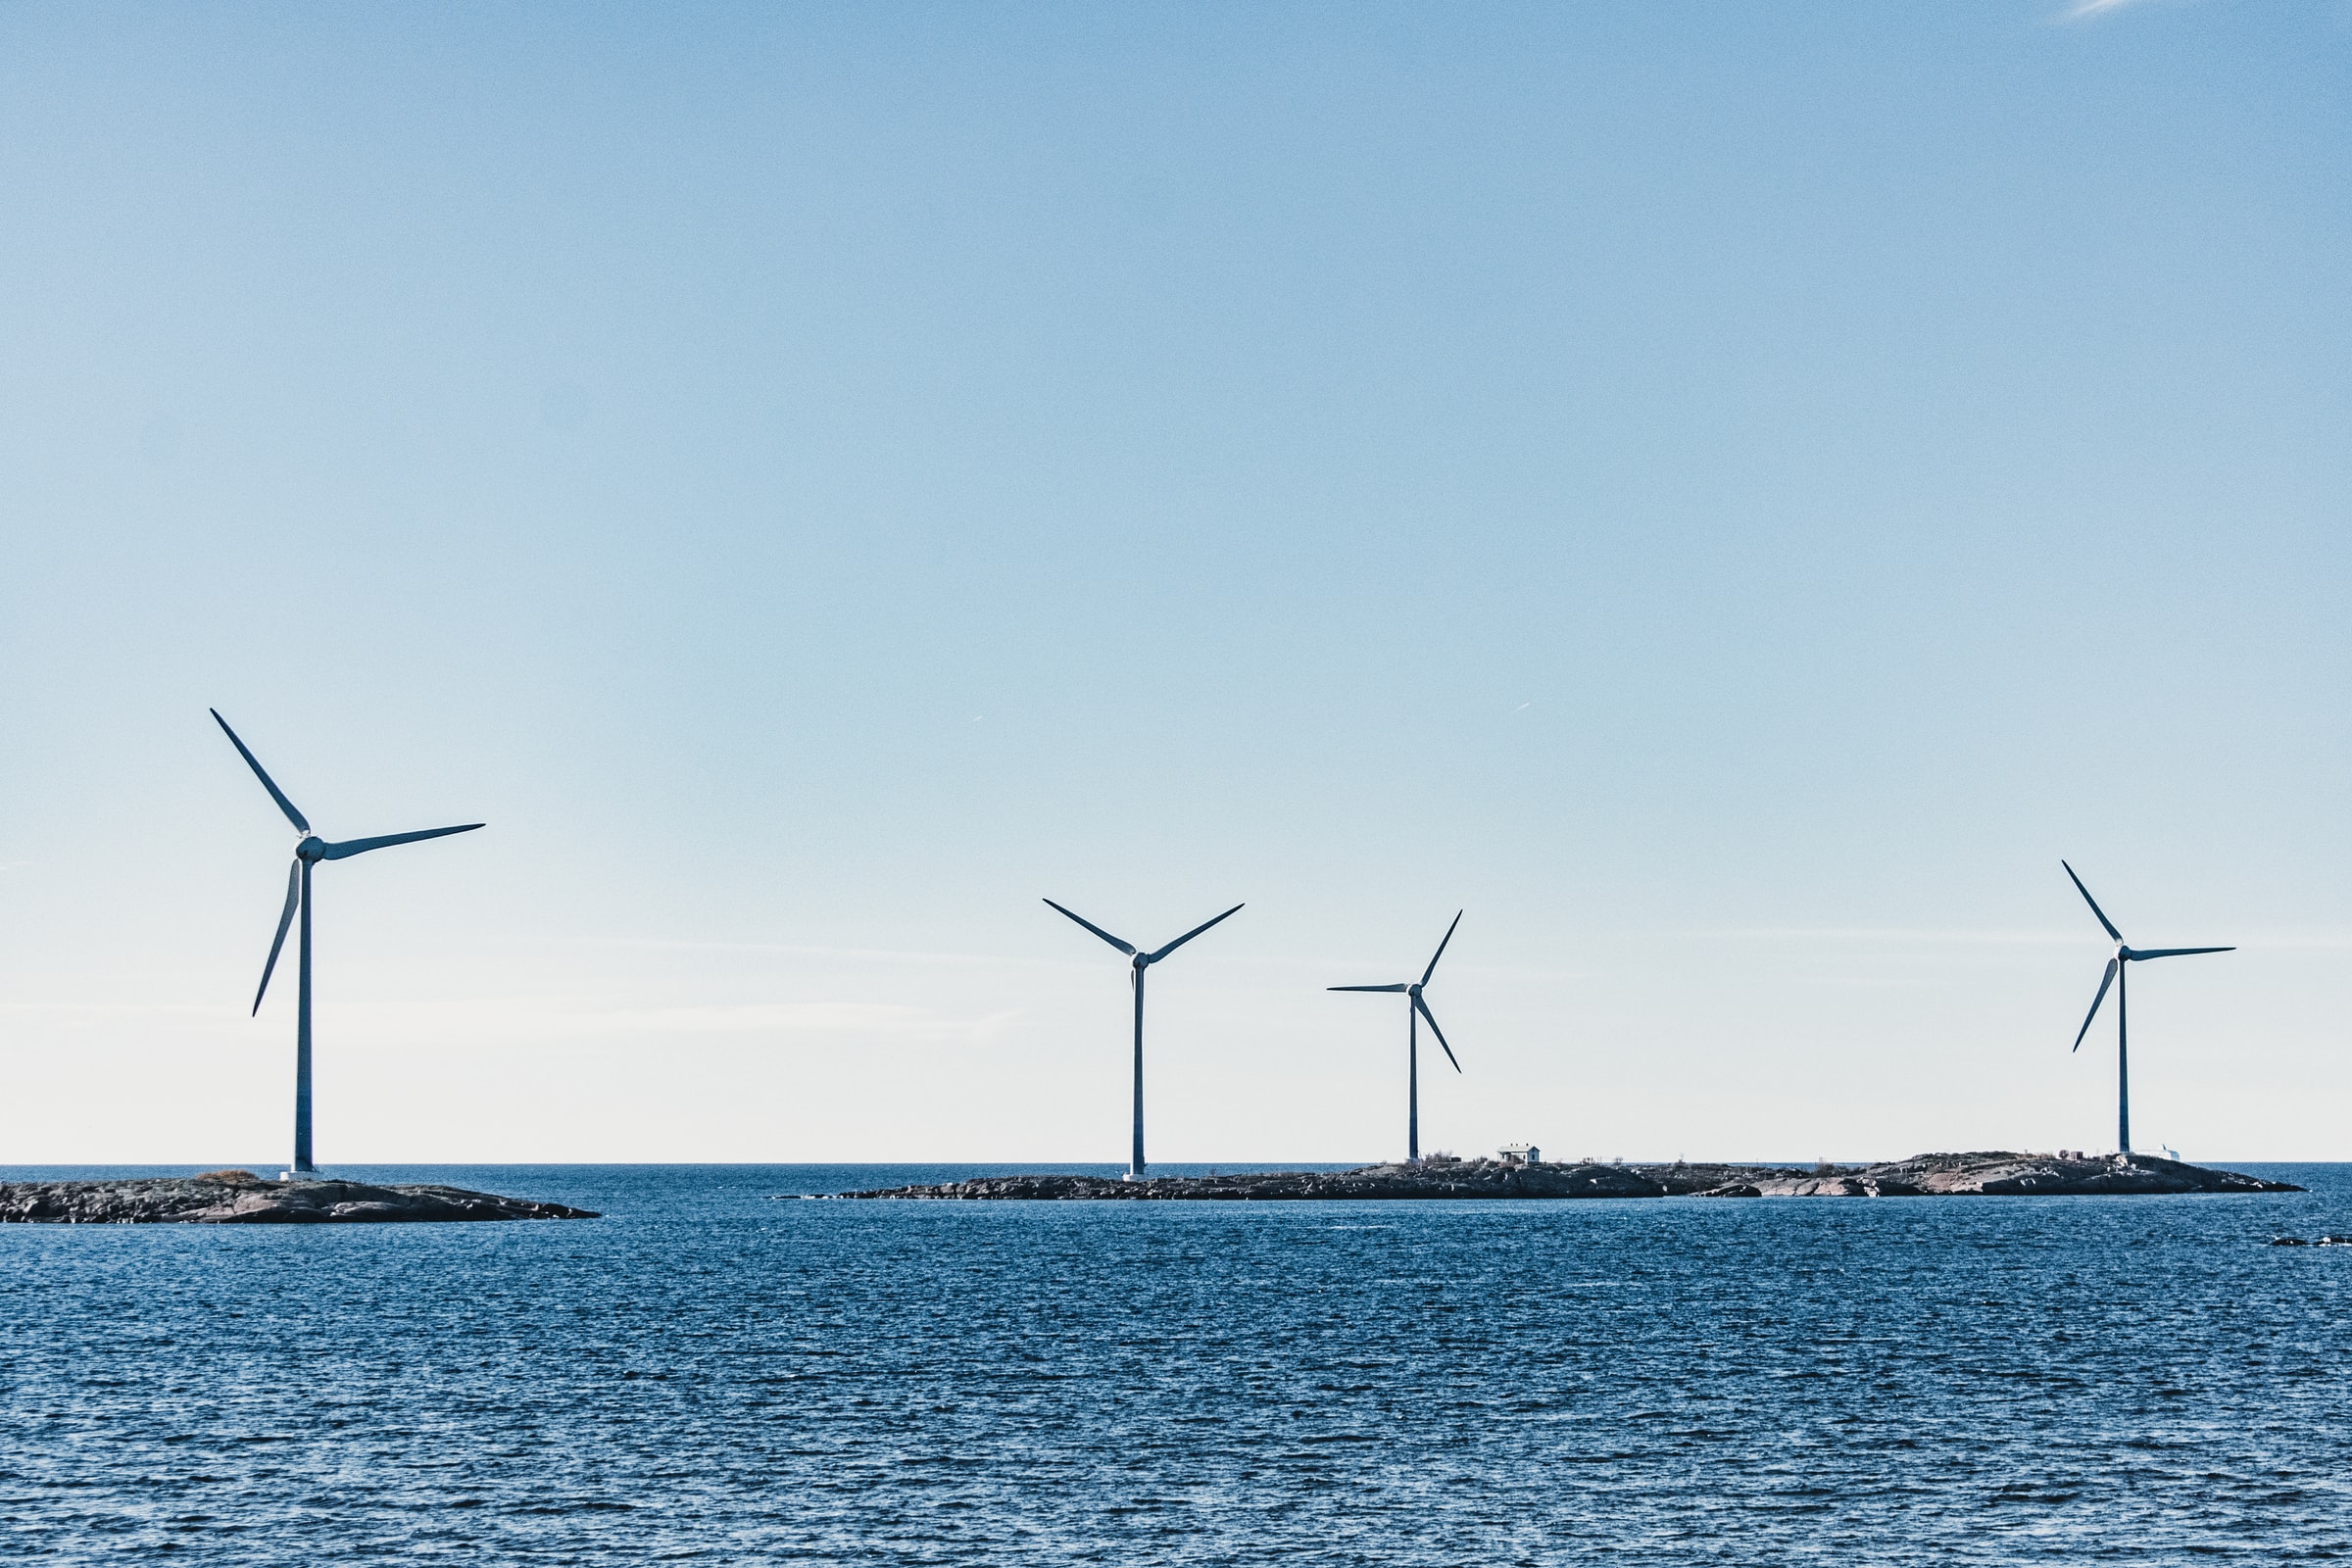 Floating offshore wind farm to power 1 million South Korean homes